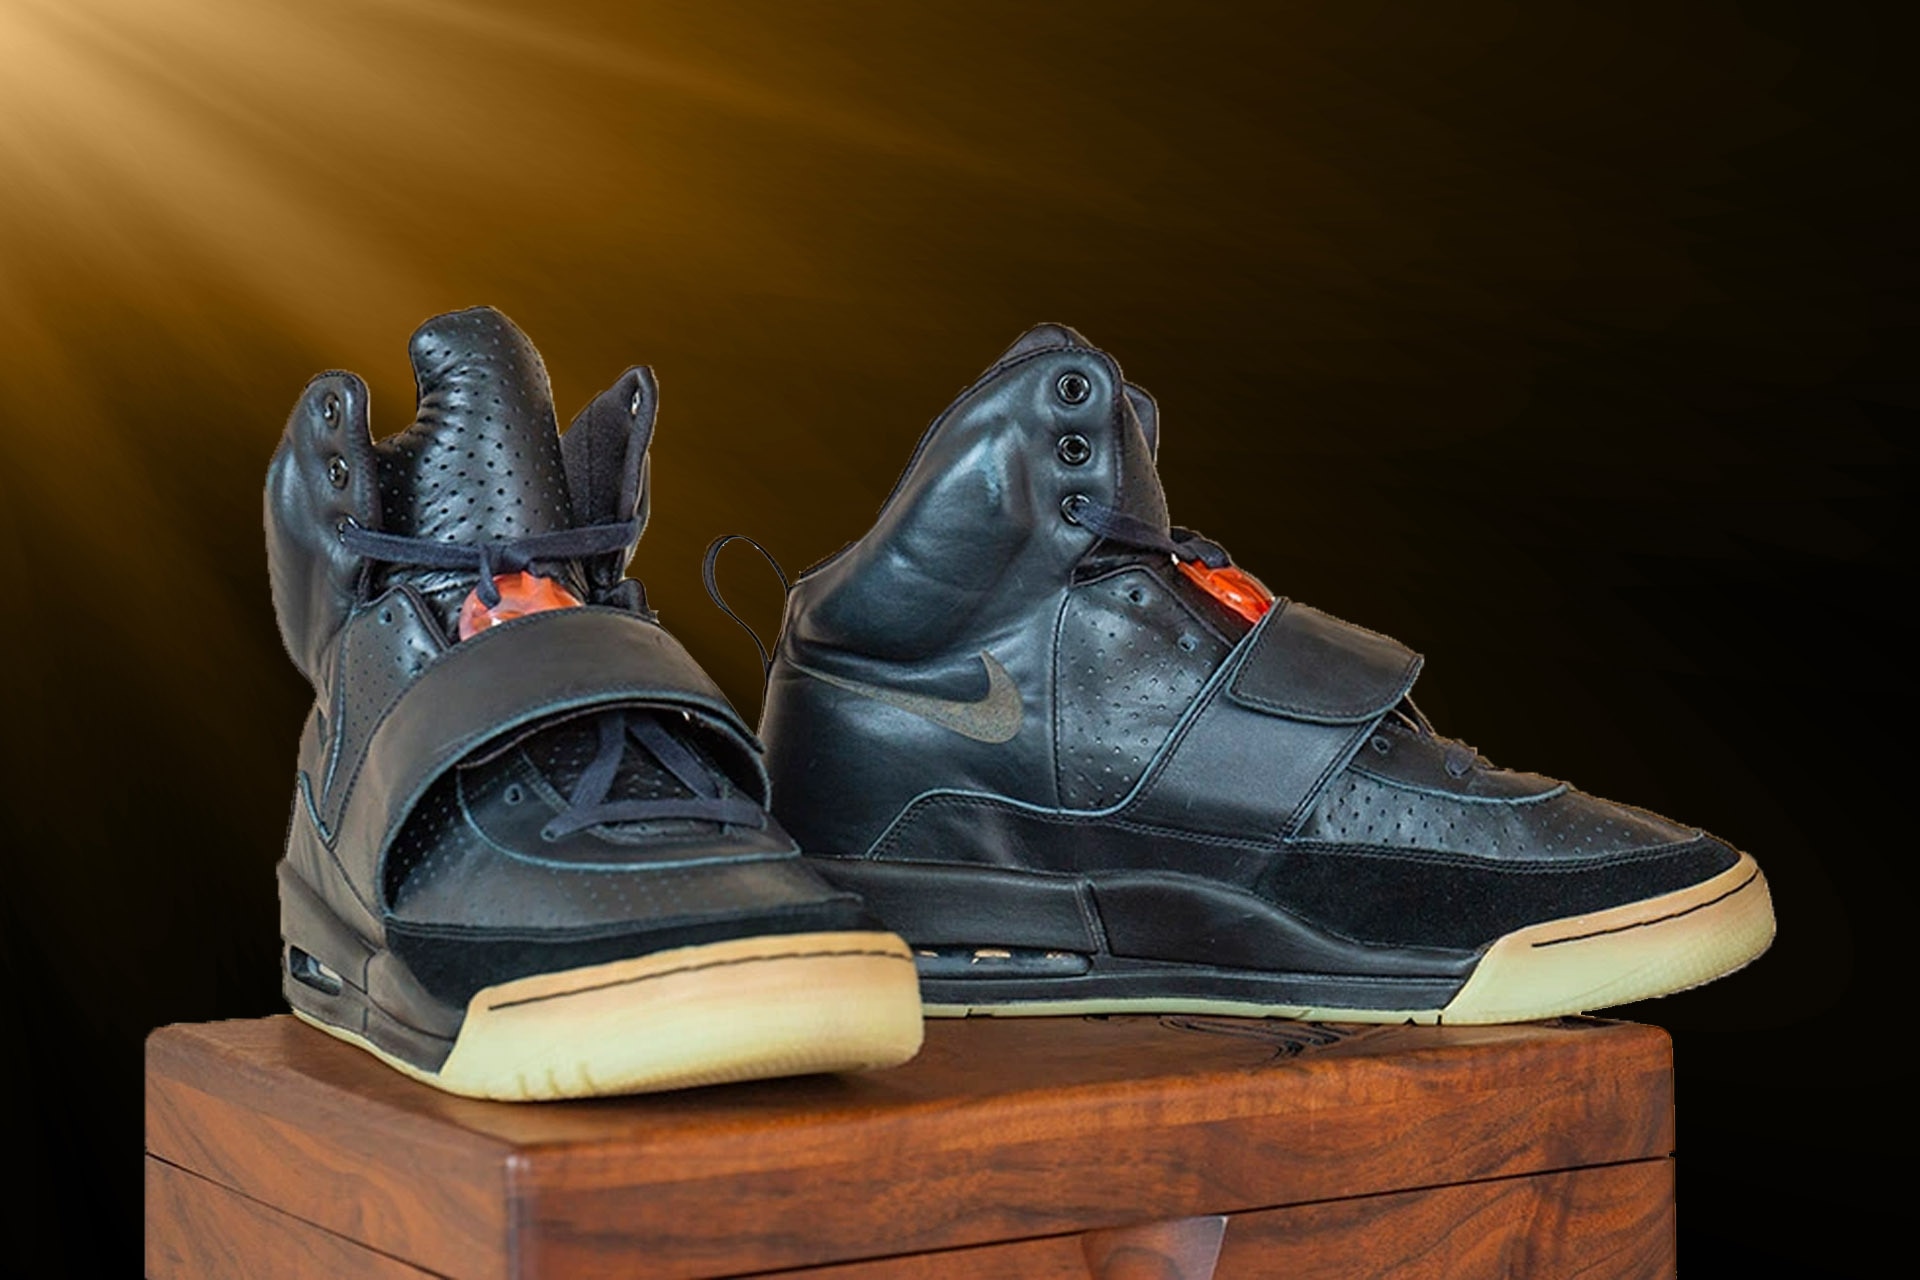 These are the 8 most expensive sneakers ever